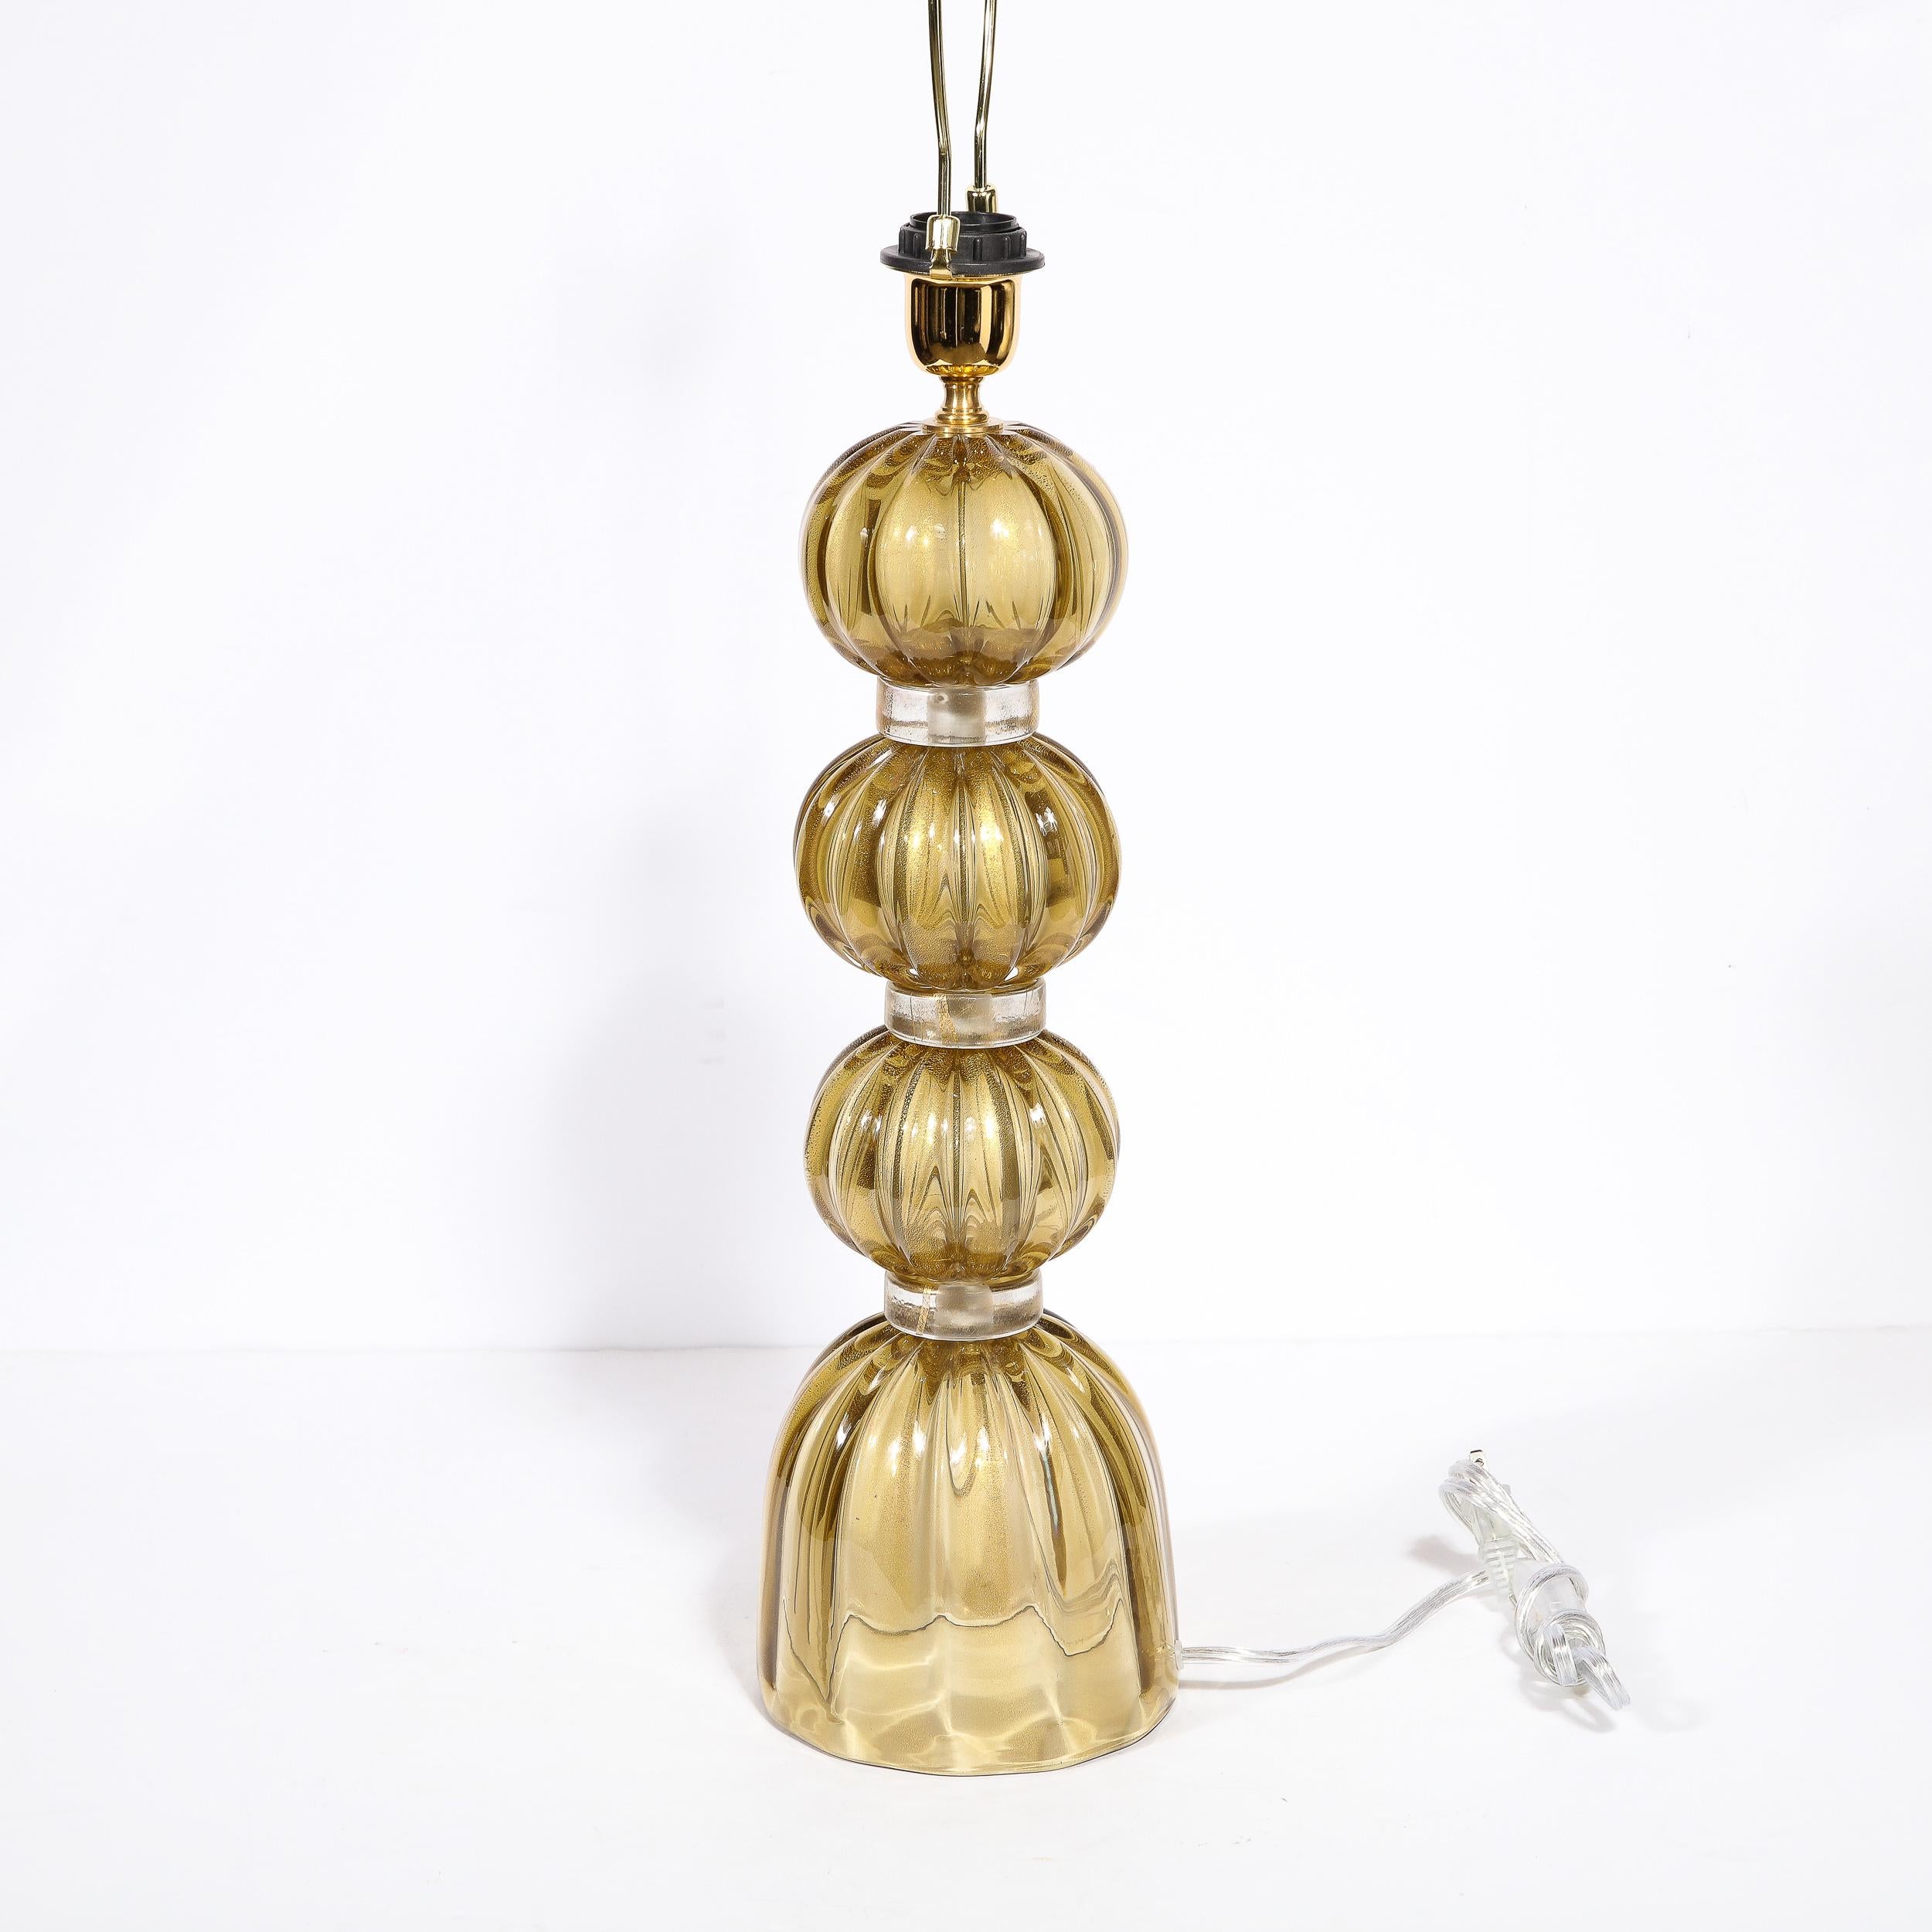 Modernist Hand-Blown Murano Glass Table Lamps in Smoked Gold W/ 24 Karat Flecks For Sale 4